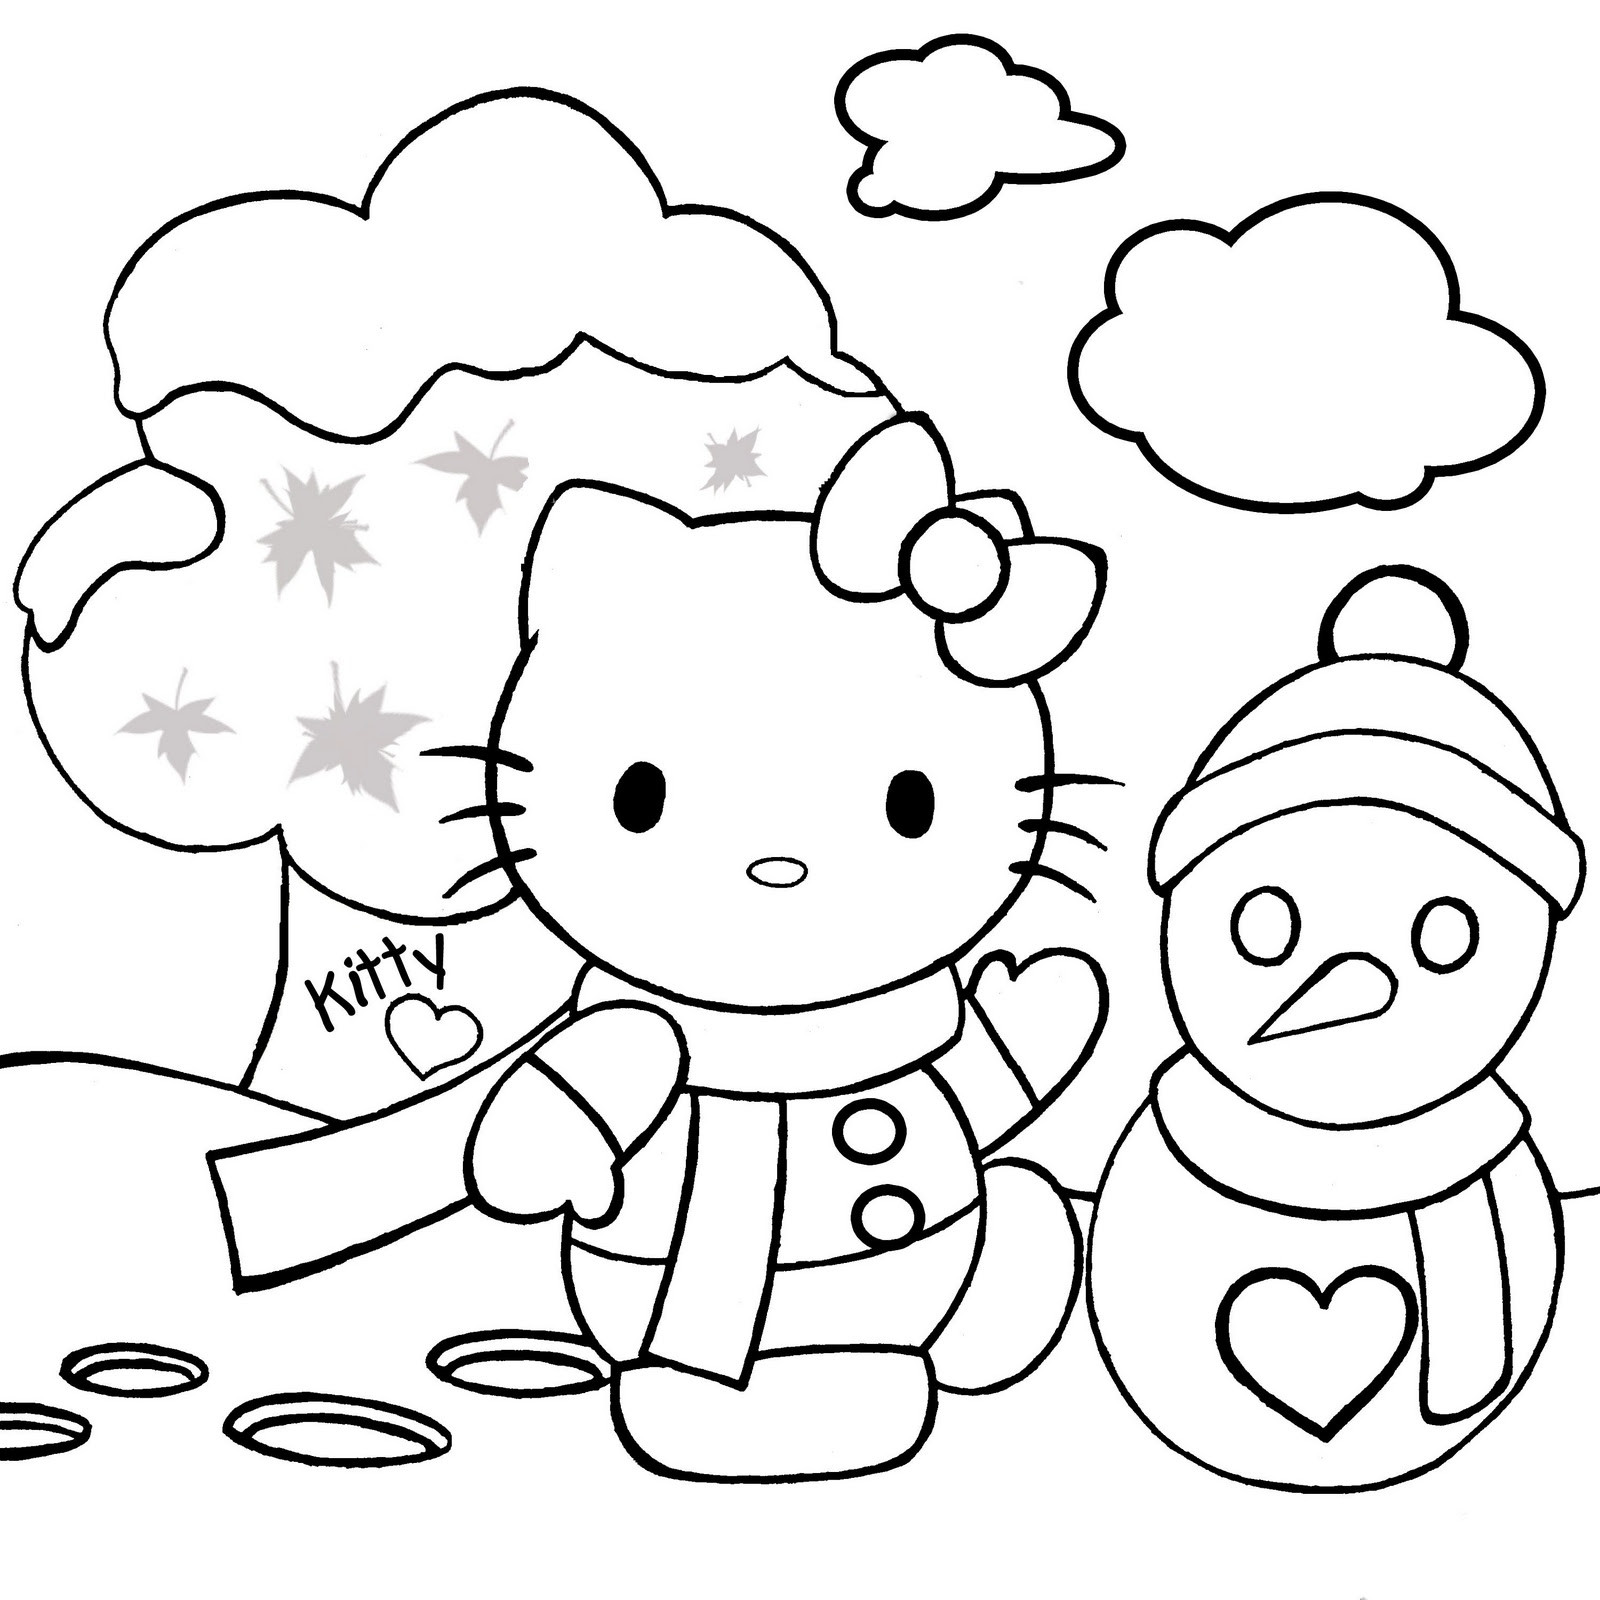 Christmas Coloring Pages For Children
 Hello Kitty Christmas Coloring Pages 1